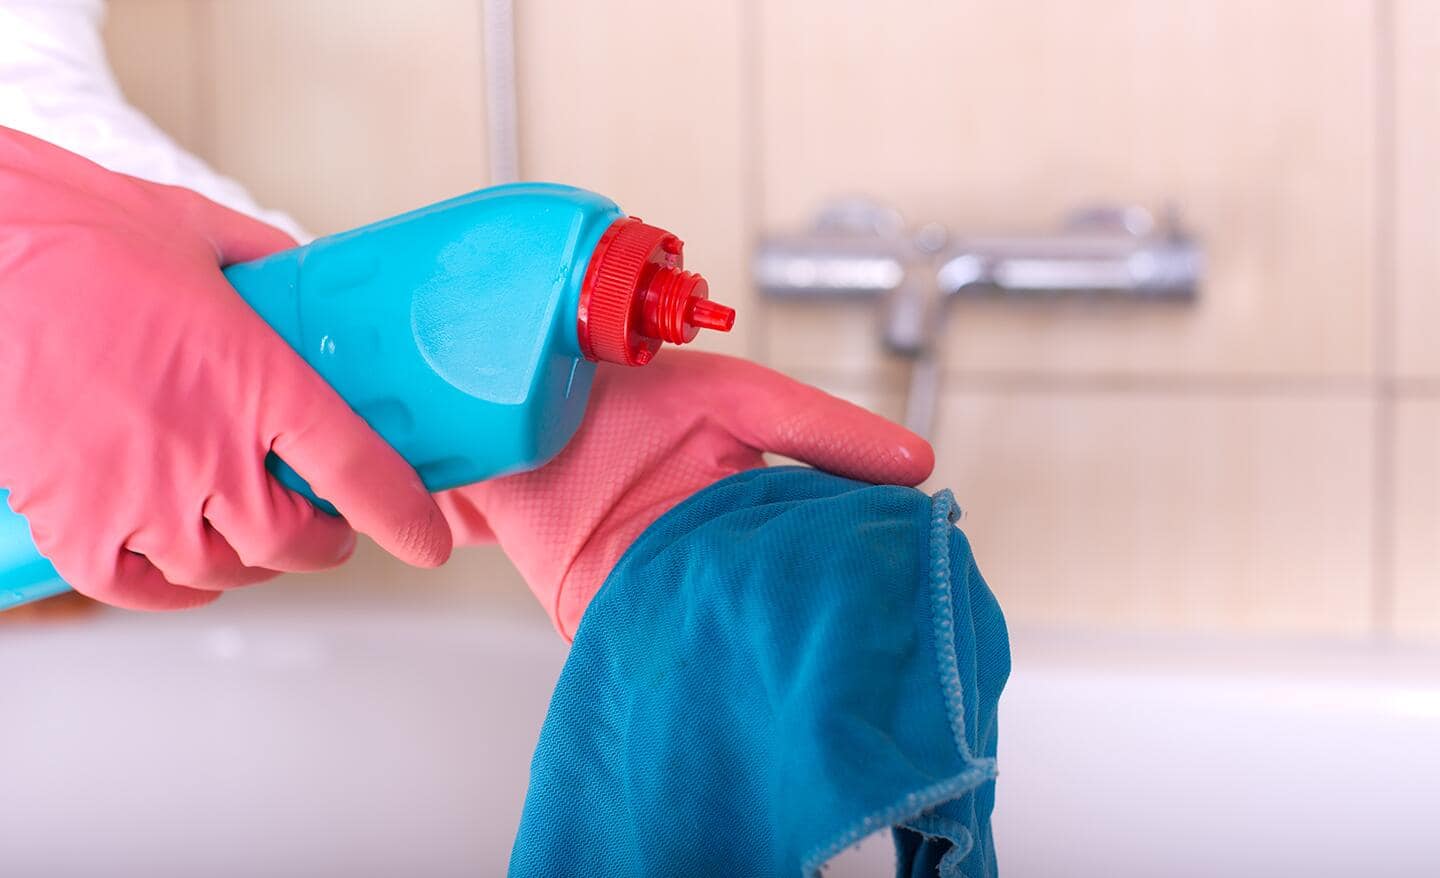 A person pours cleaner onto a rag.